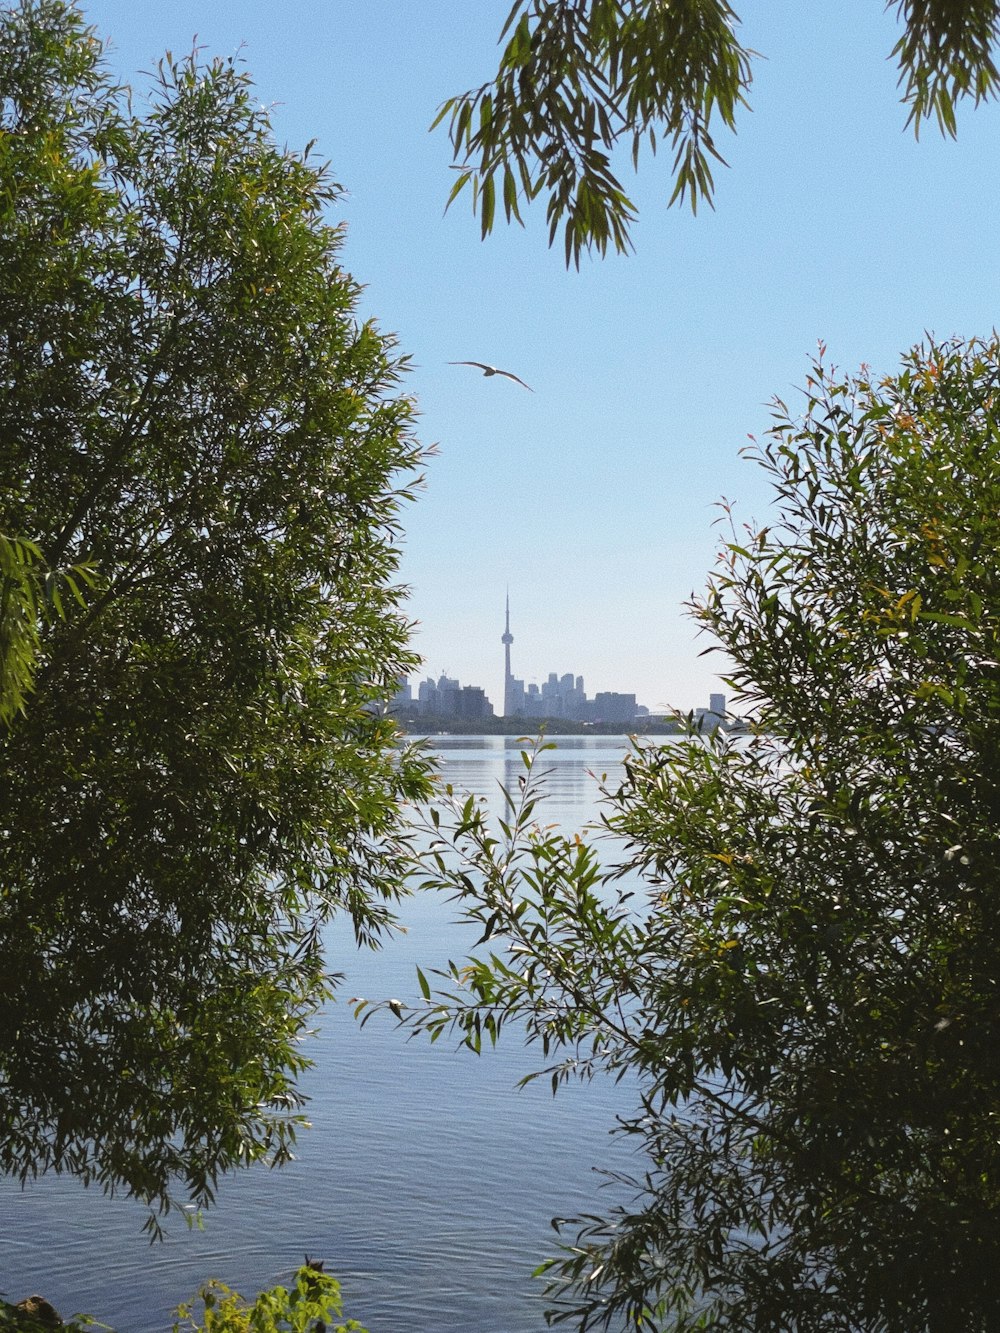 a body of water surrounded by trees with a city in the background